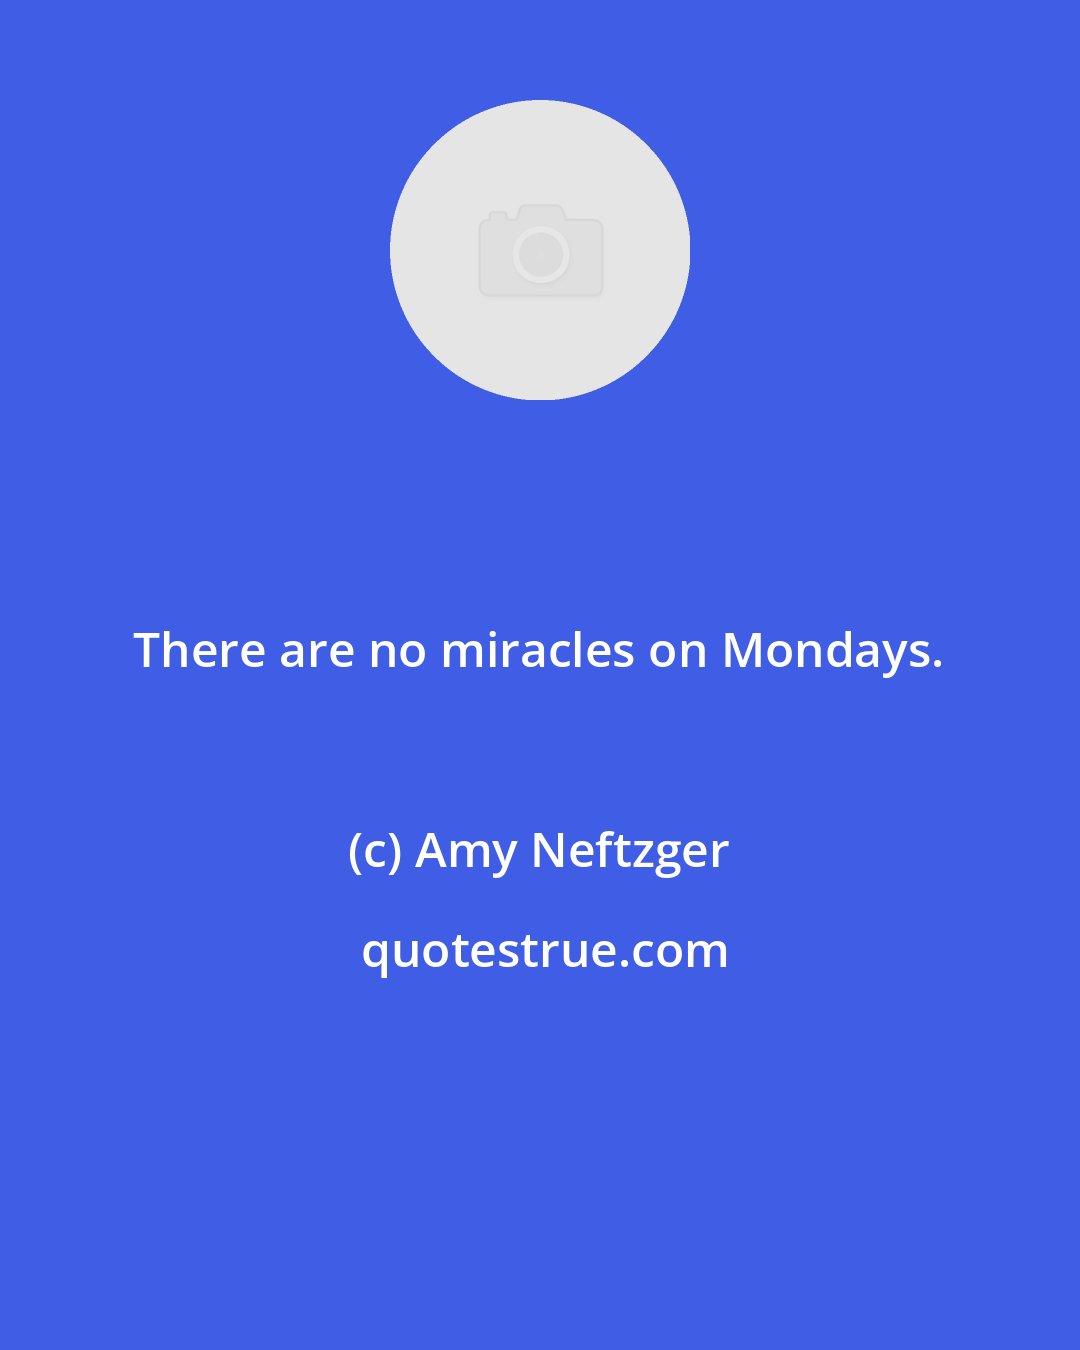 Amy Neftzger: There are no miracles on Mondays.